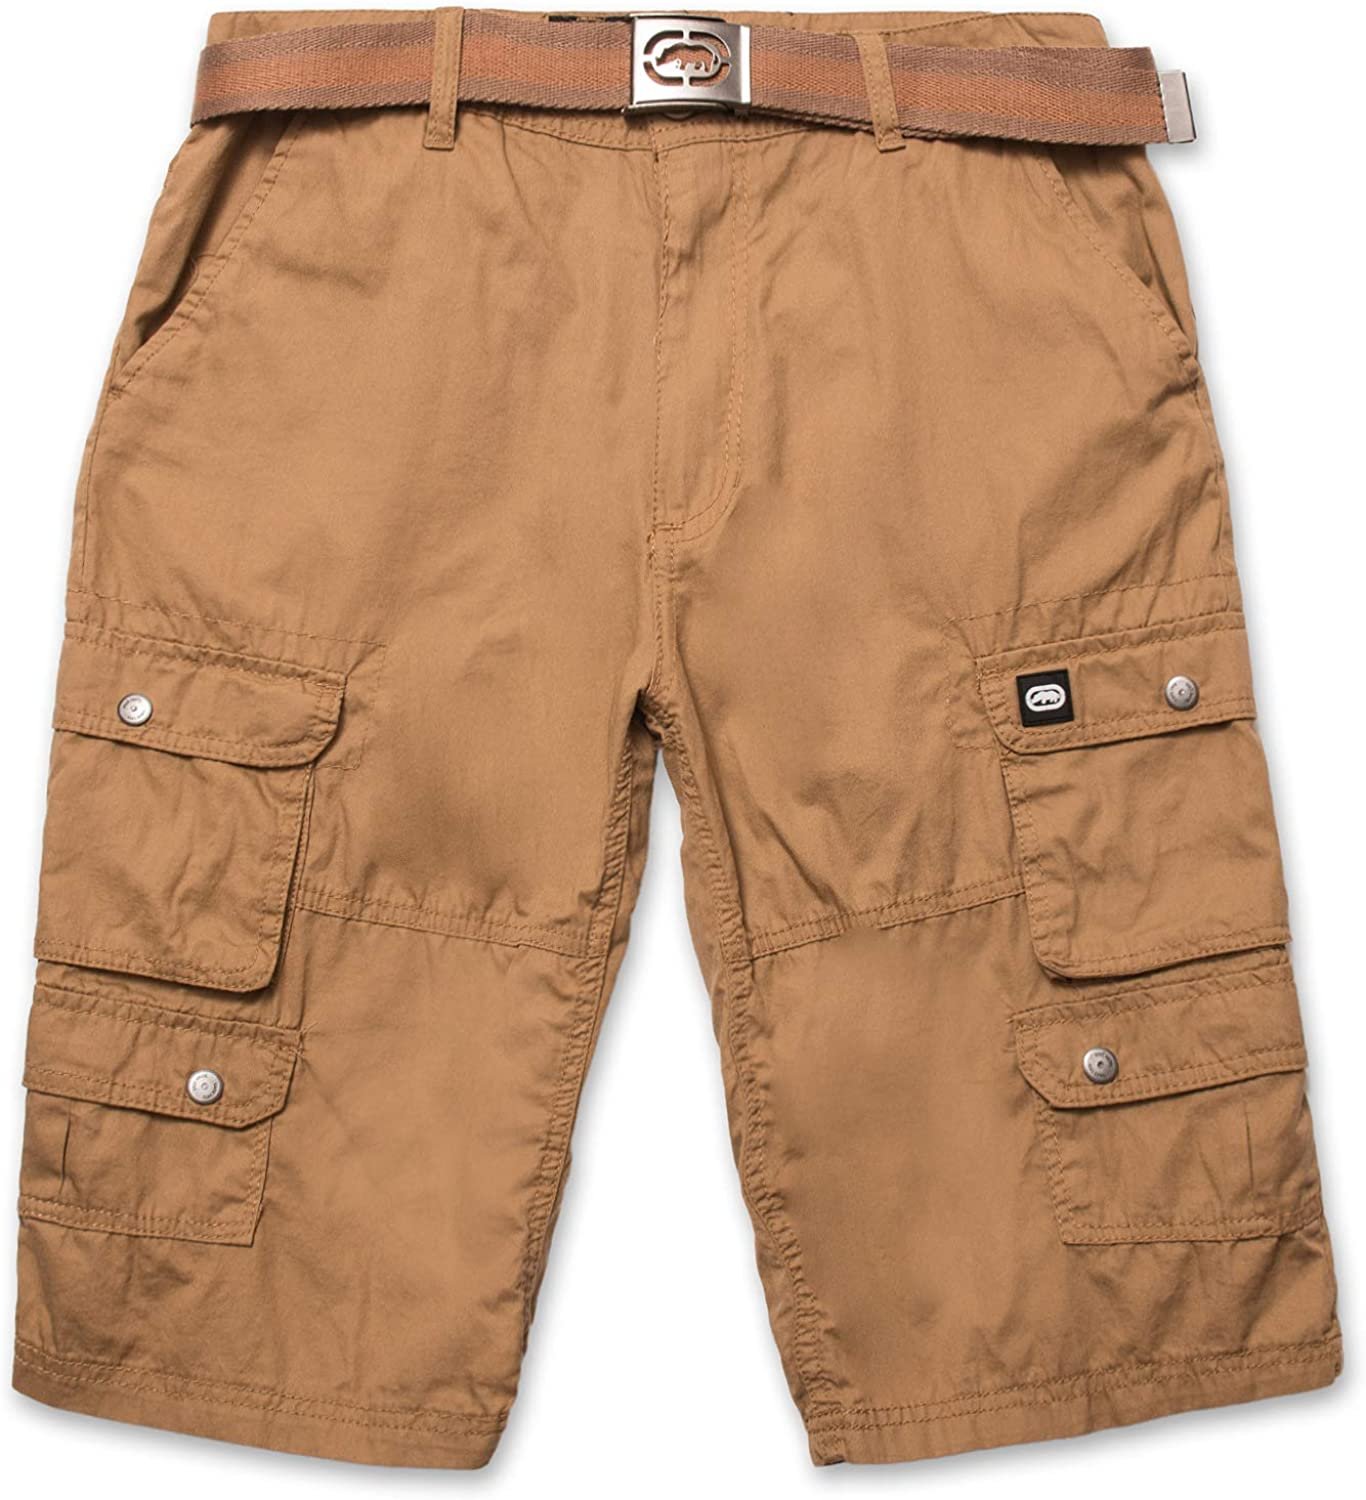 Mens Cargo Shorts with Belt Cargo Shorts for Men Twill Shorts by ECKO